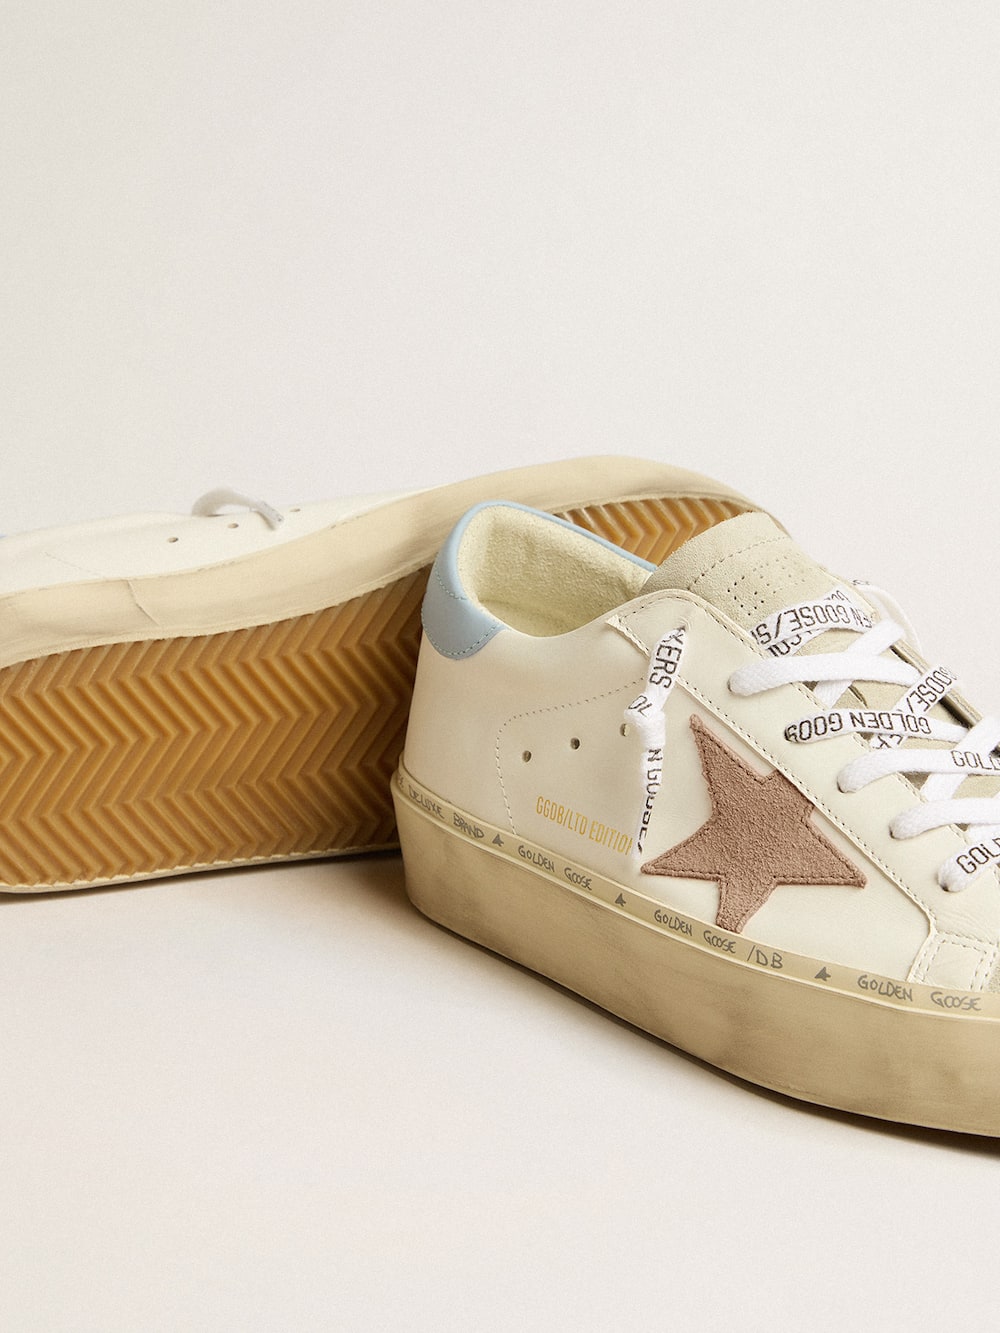 Golden Goose - Hi Star LTD with pink suede star and light blue leather heel tab in 